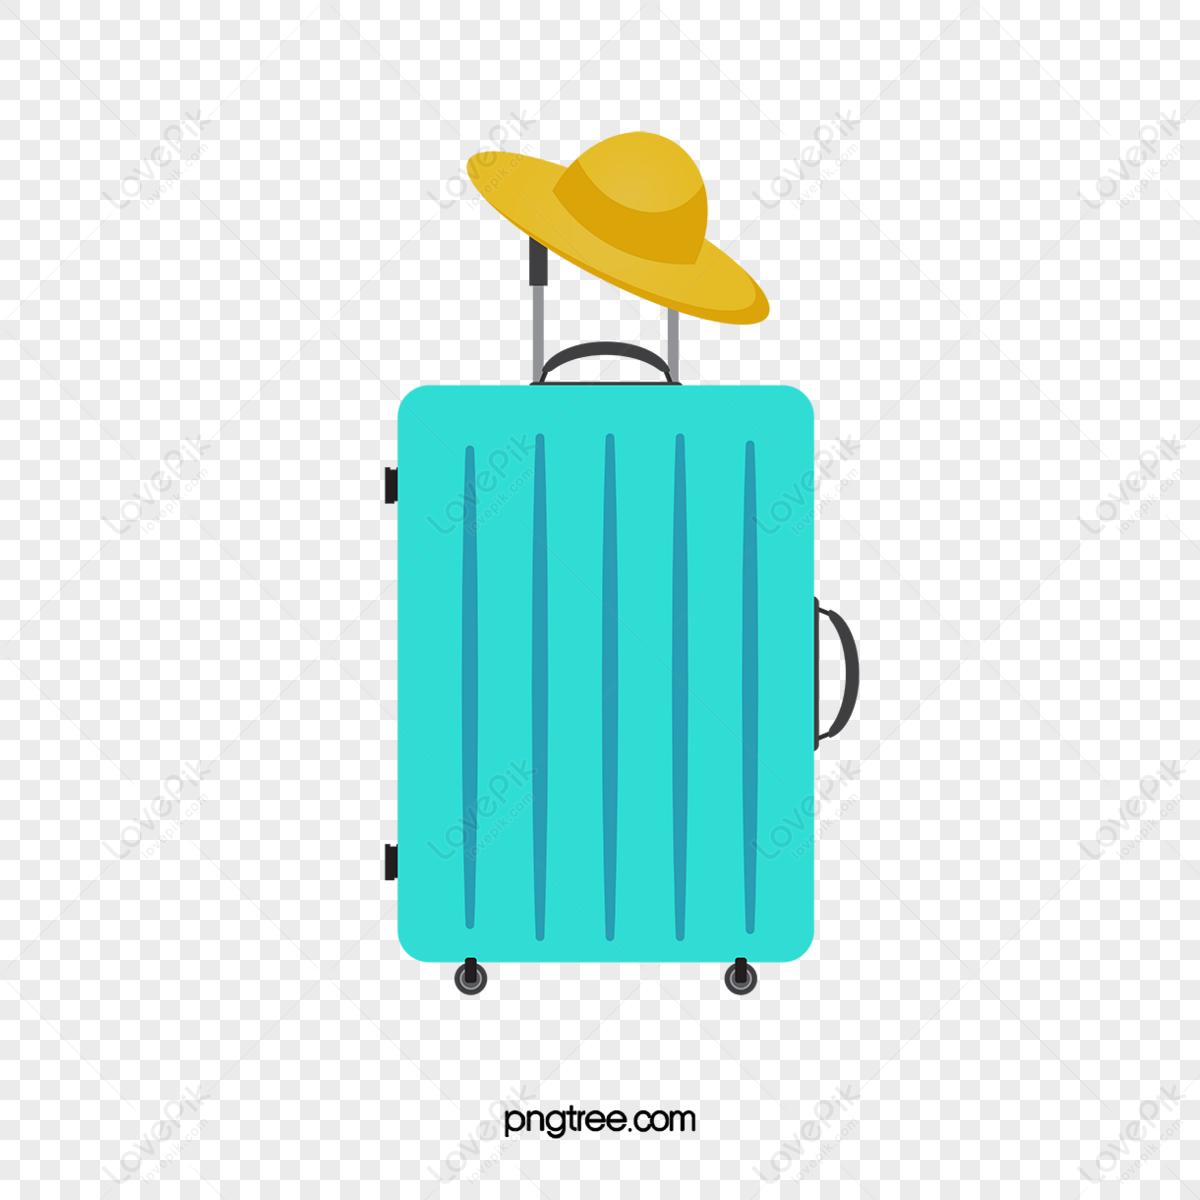 Blue Golden Week Travel Luggage,trunk,trunks,travel around the world png image free download